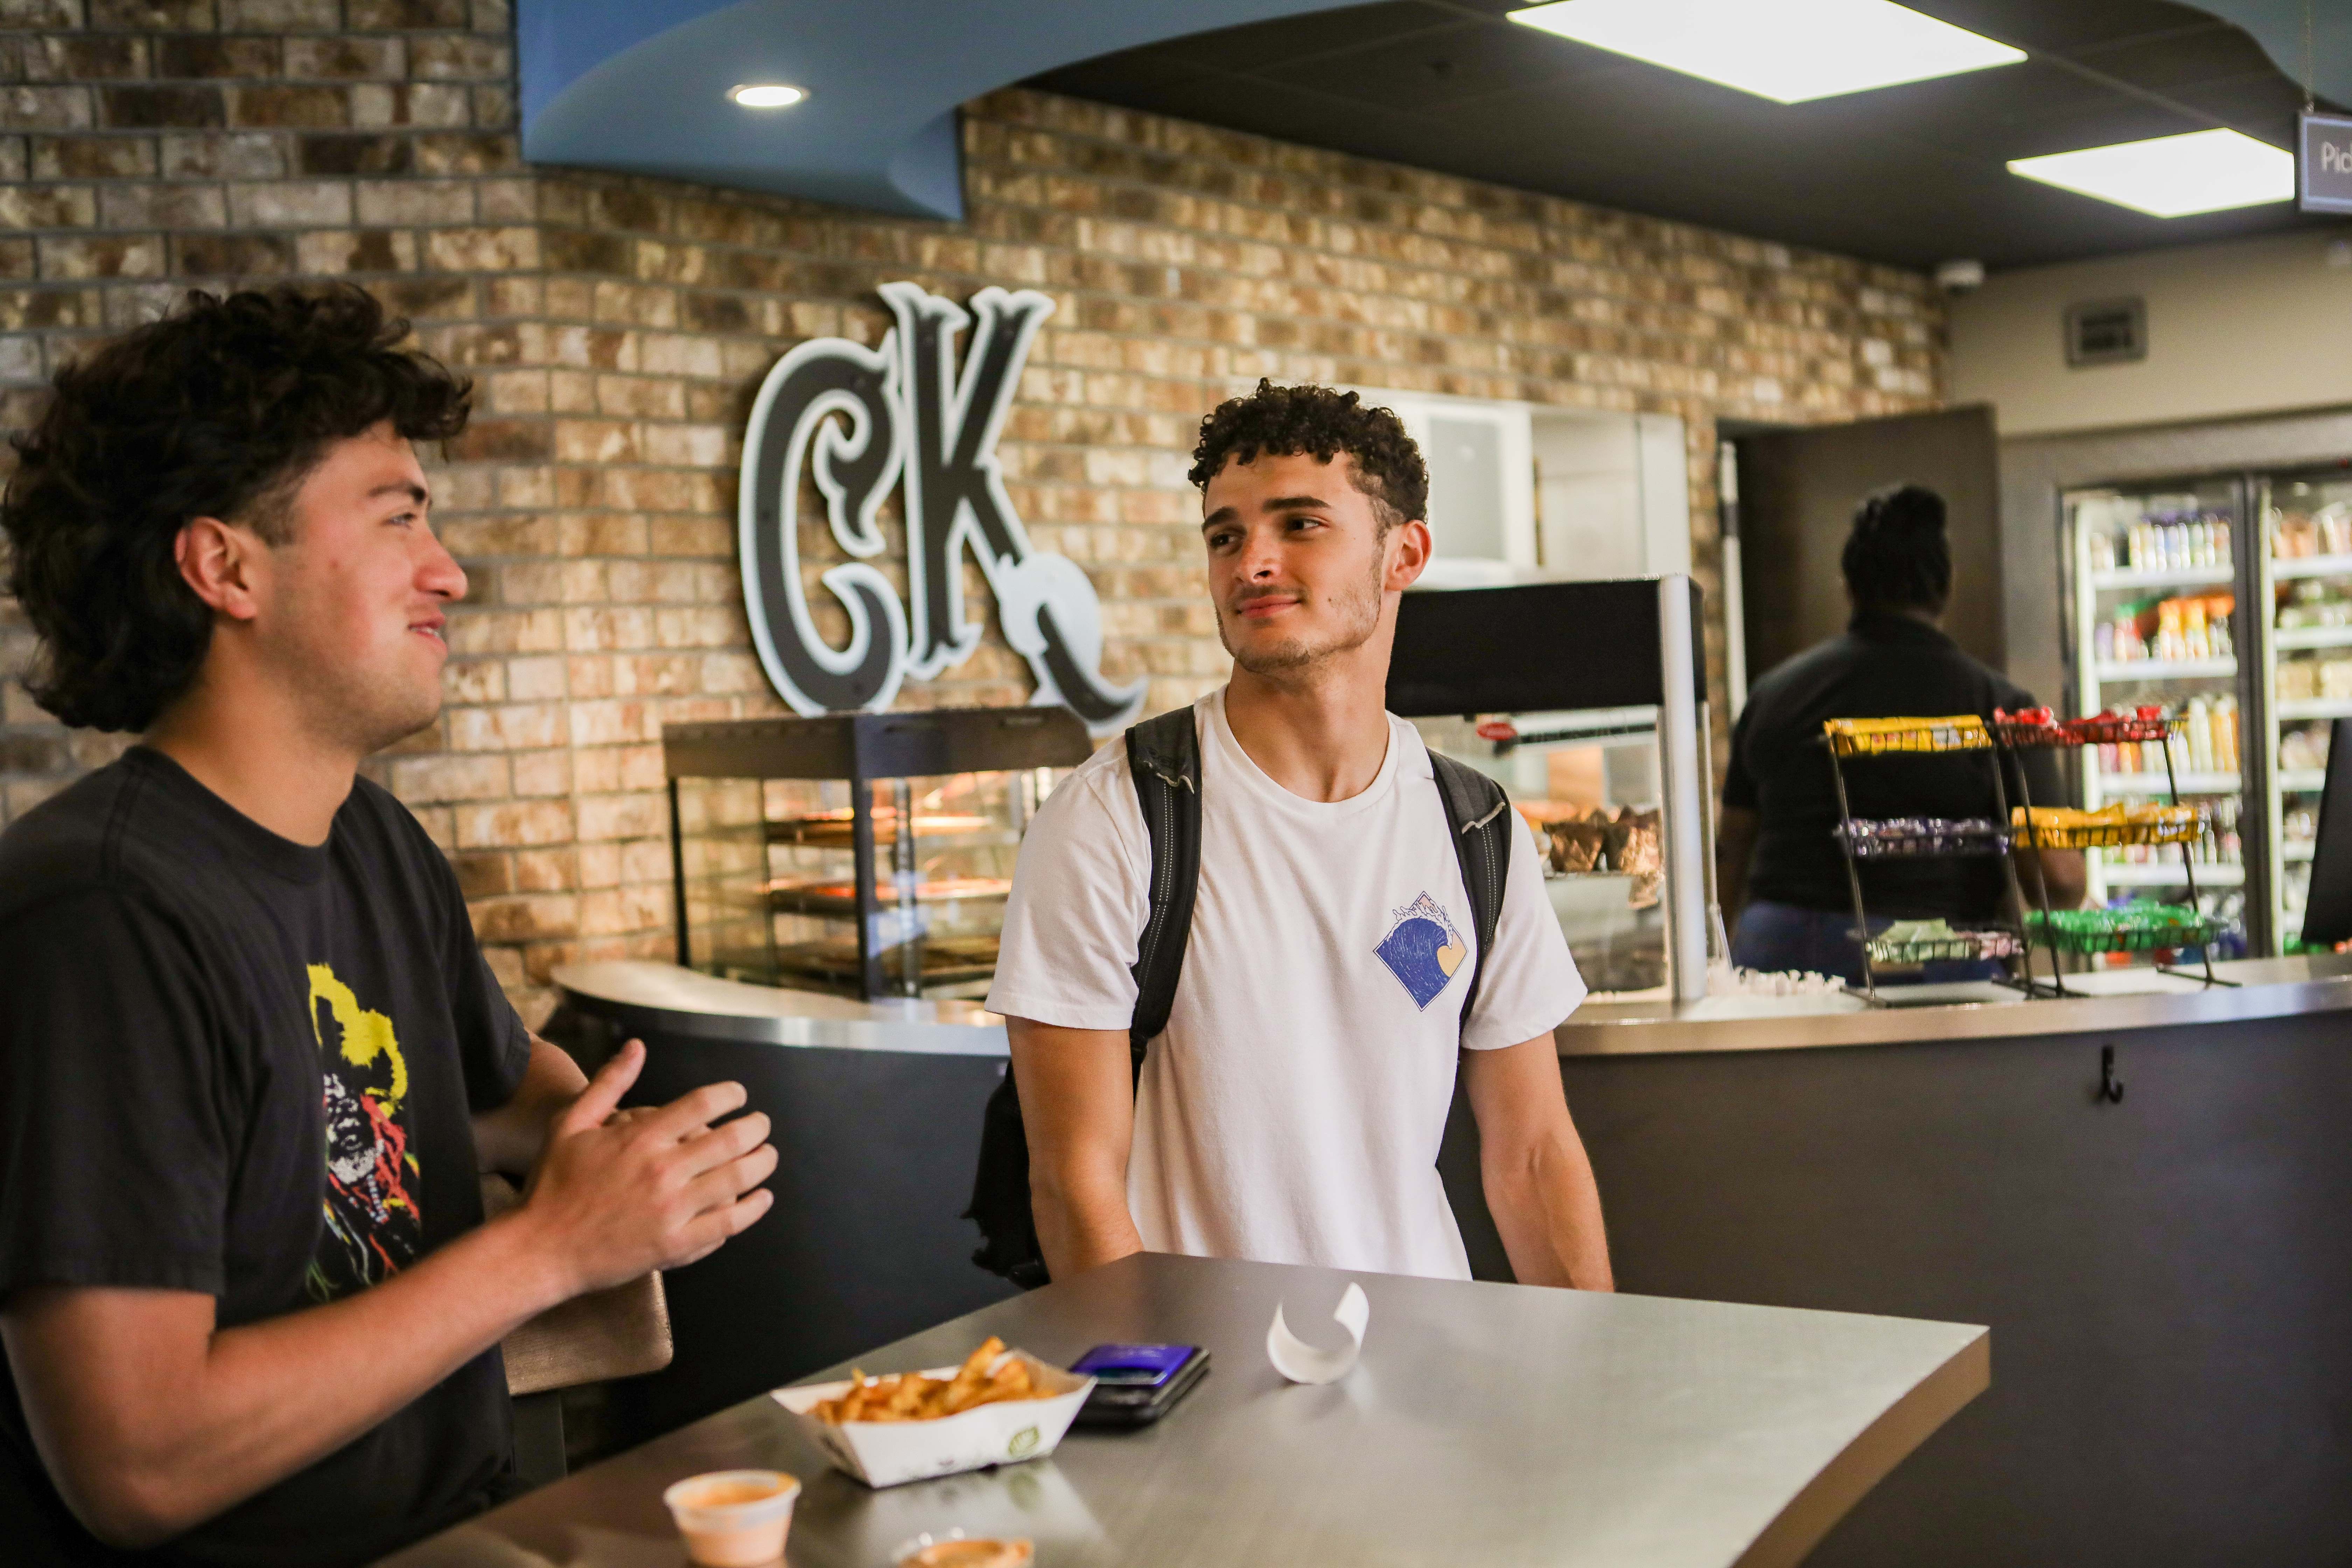 CK2, eatery, campus eatery